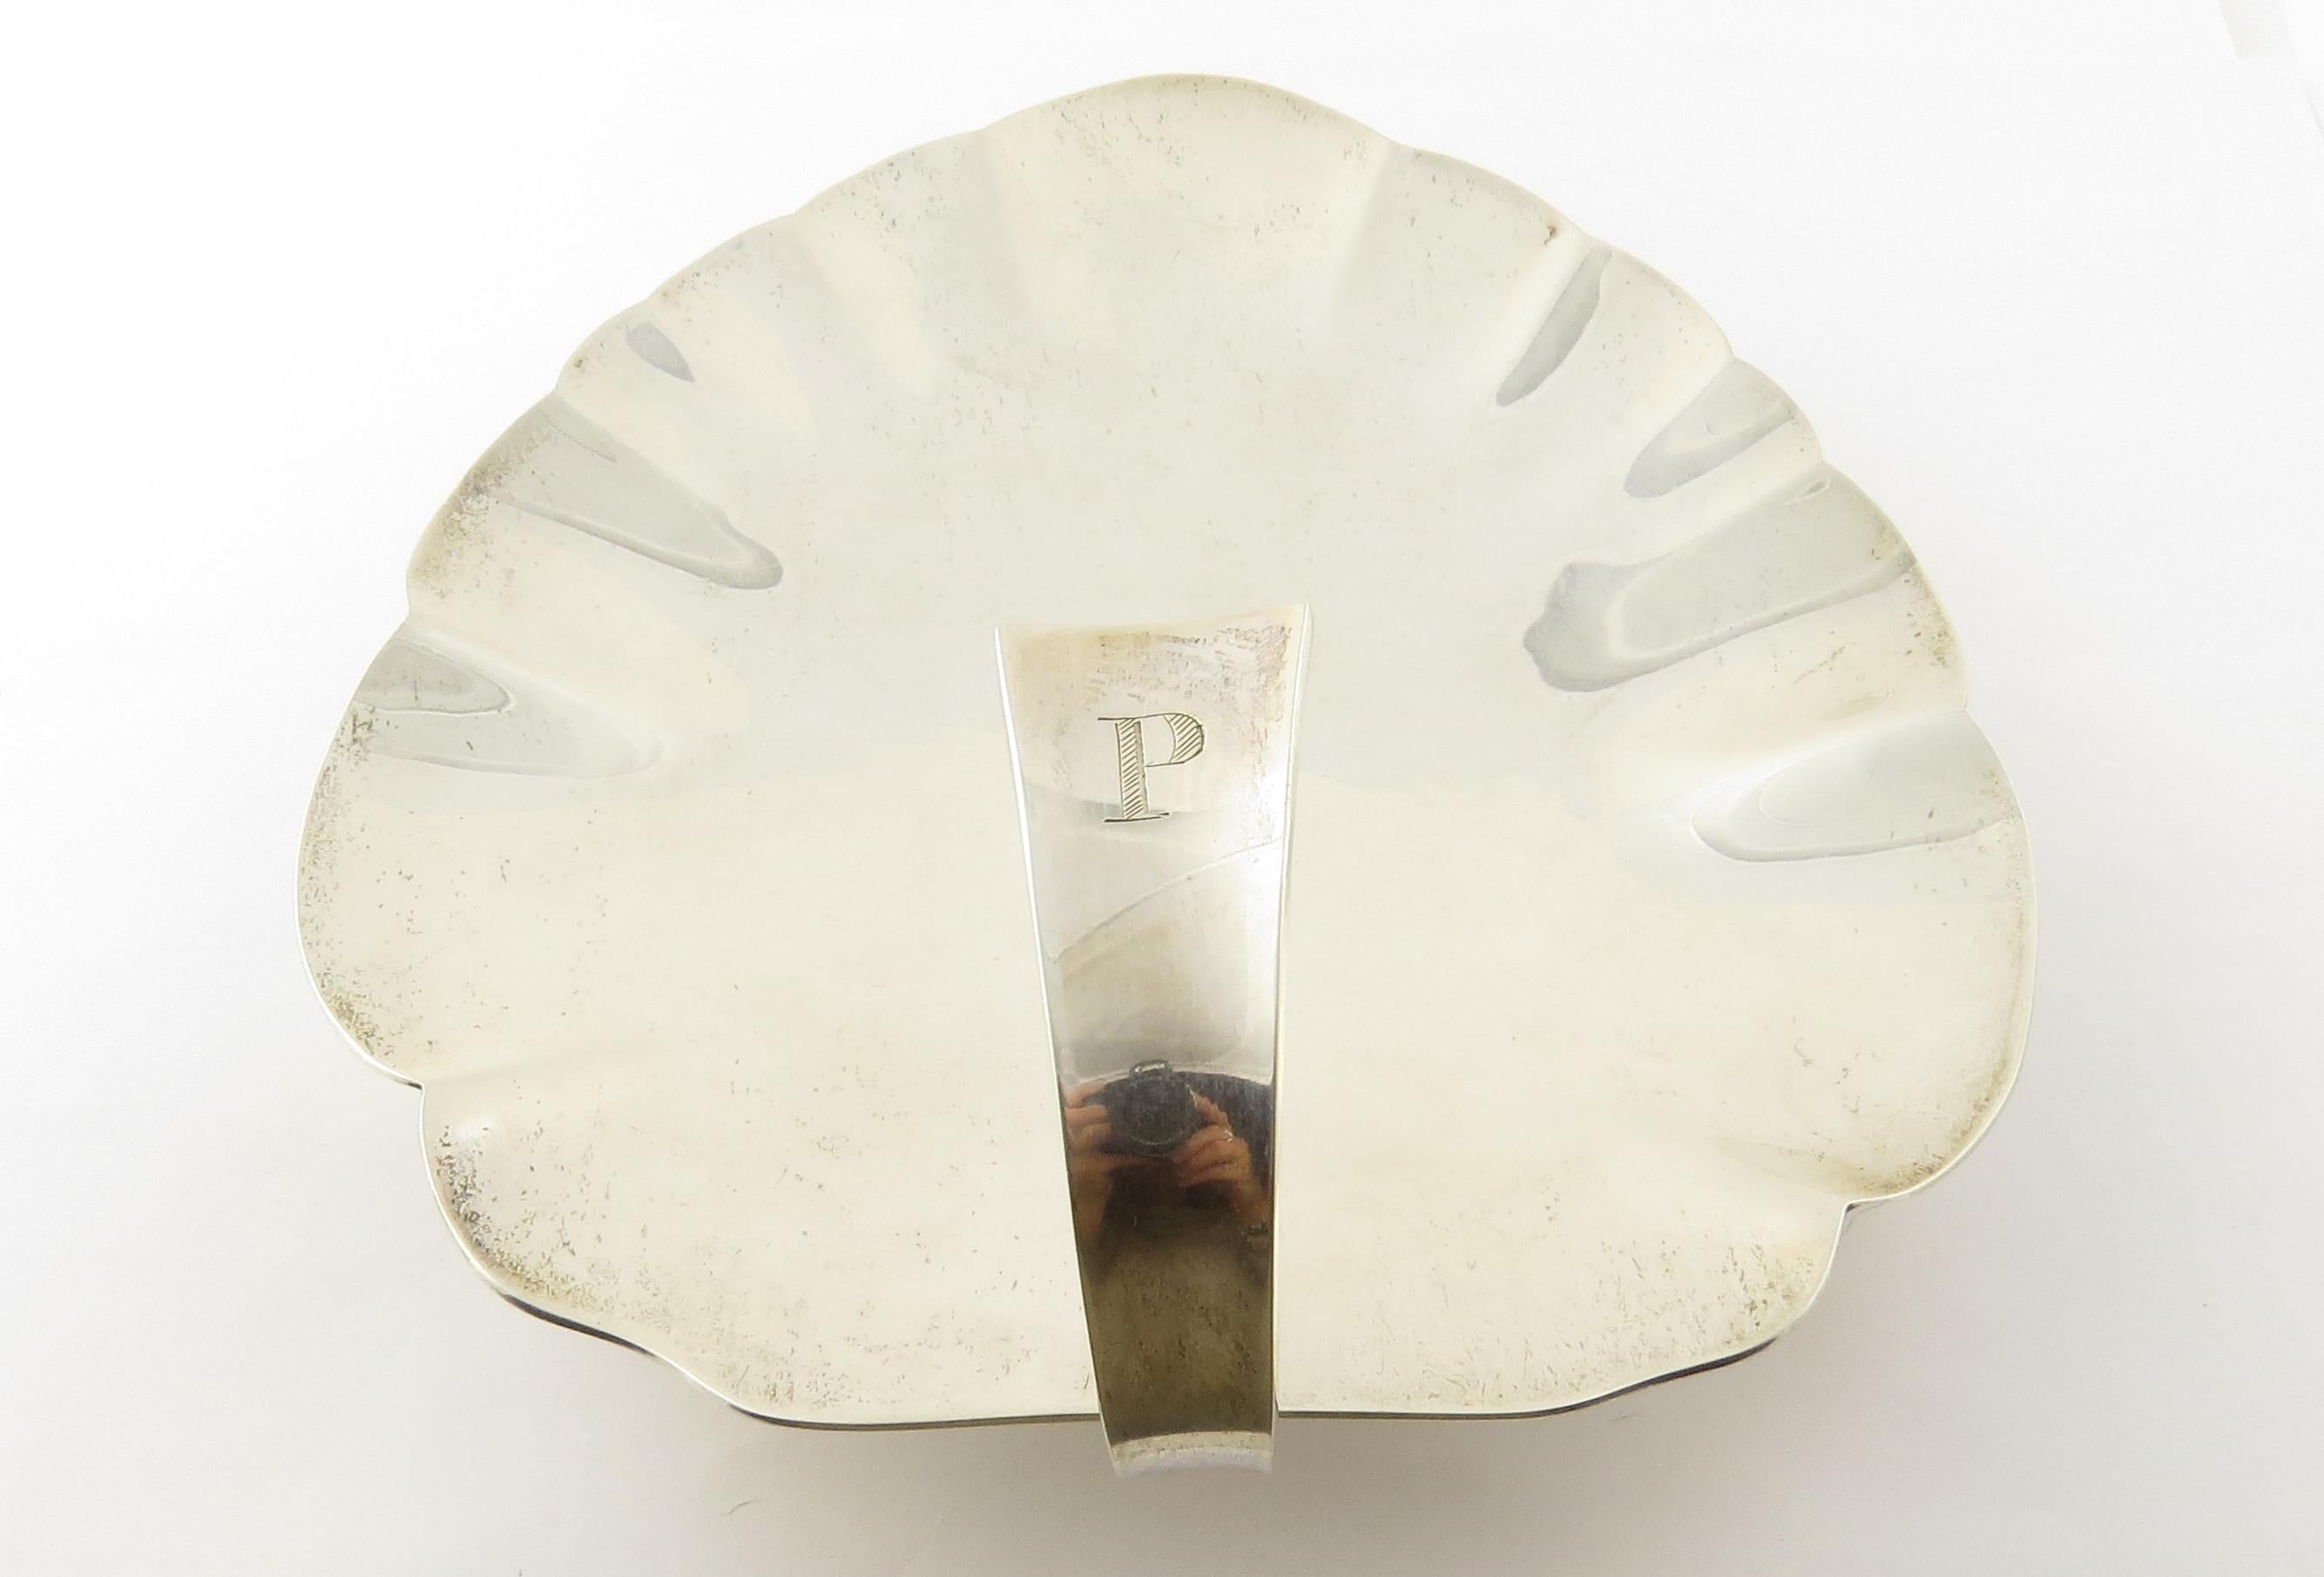 Allan Adler sterling silver leaf shaped footed plate with 3 ball feet and the letter P monogrammed on handle. Marked: Allan Adler HANDMADE STERLING. Measures: 6 1/8